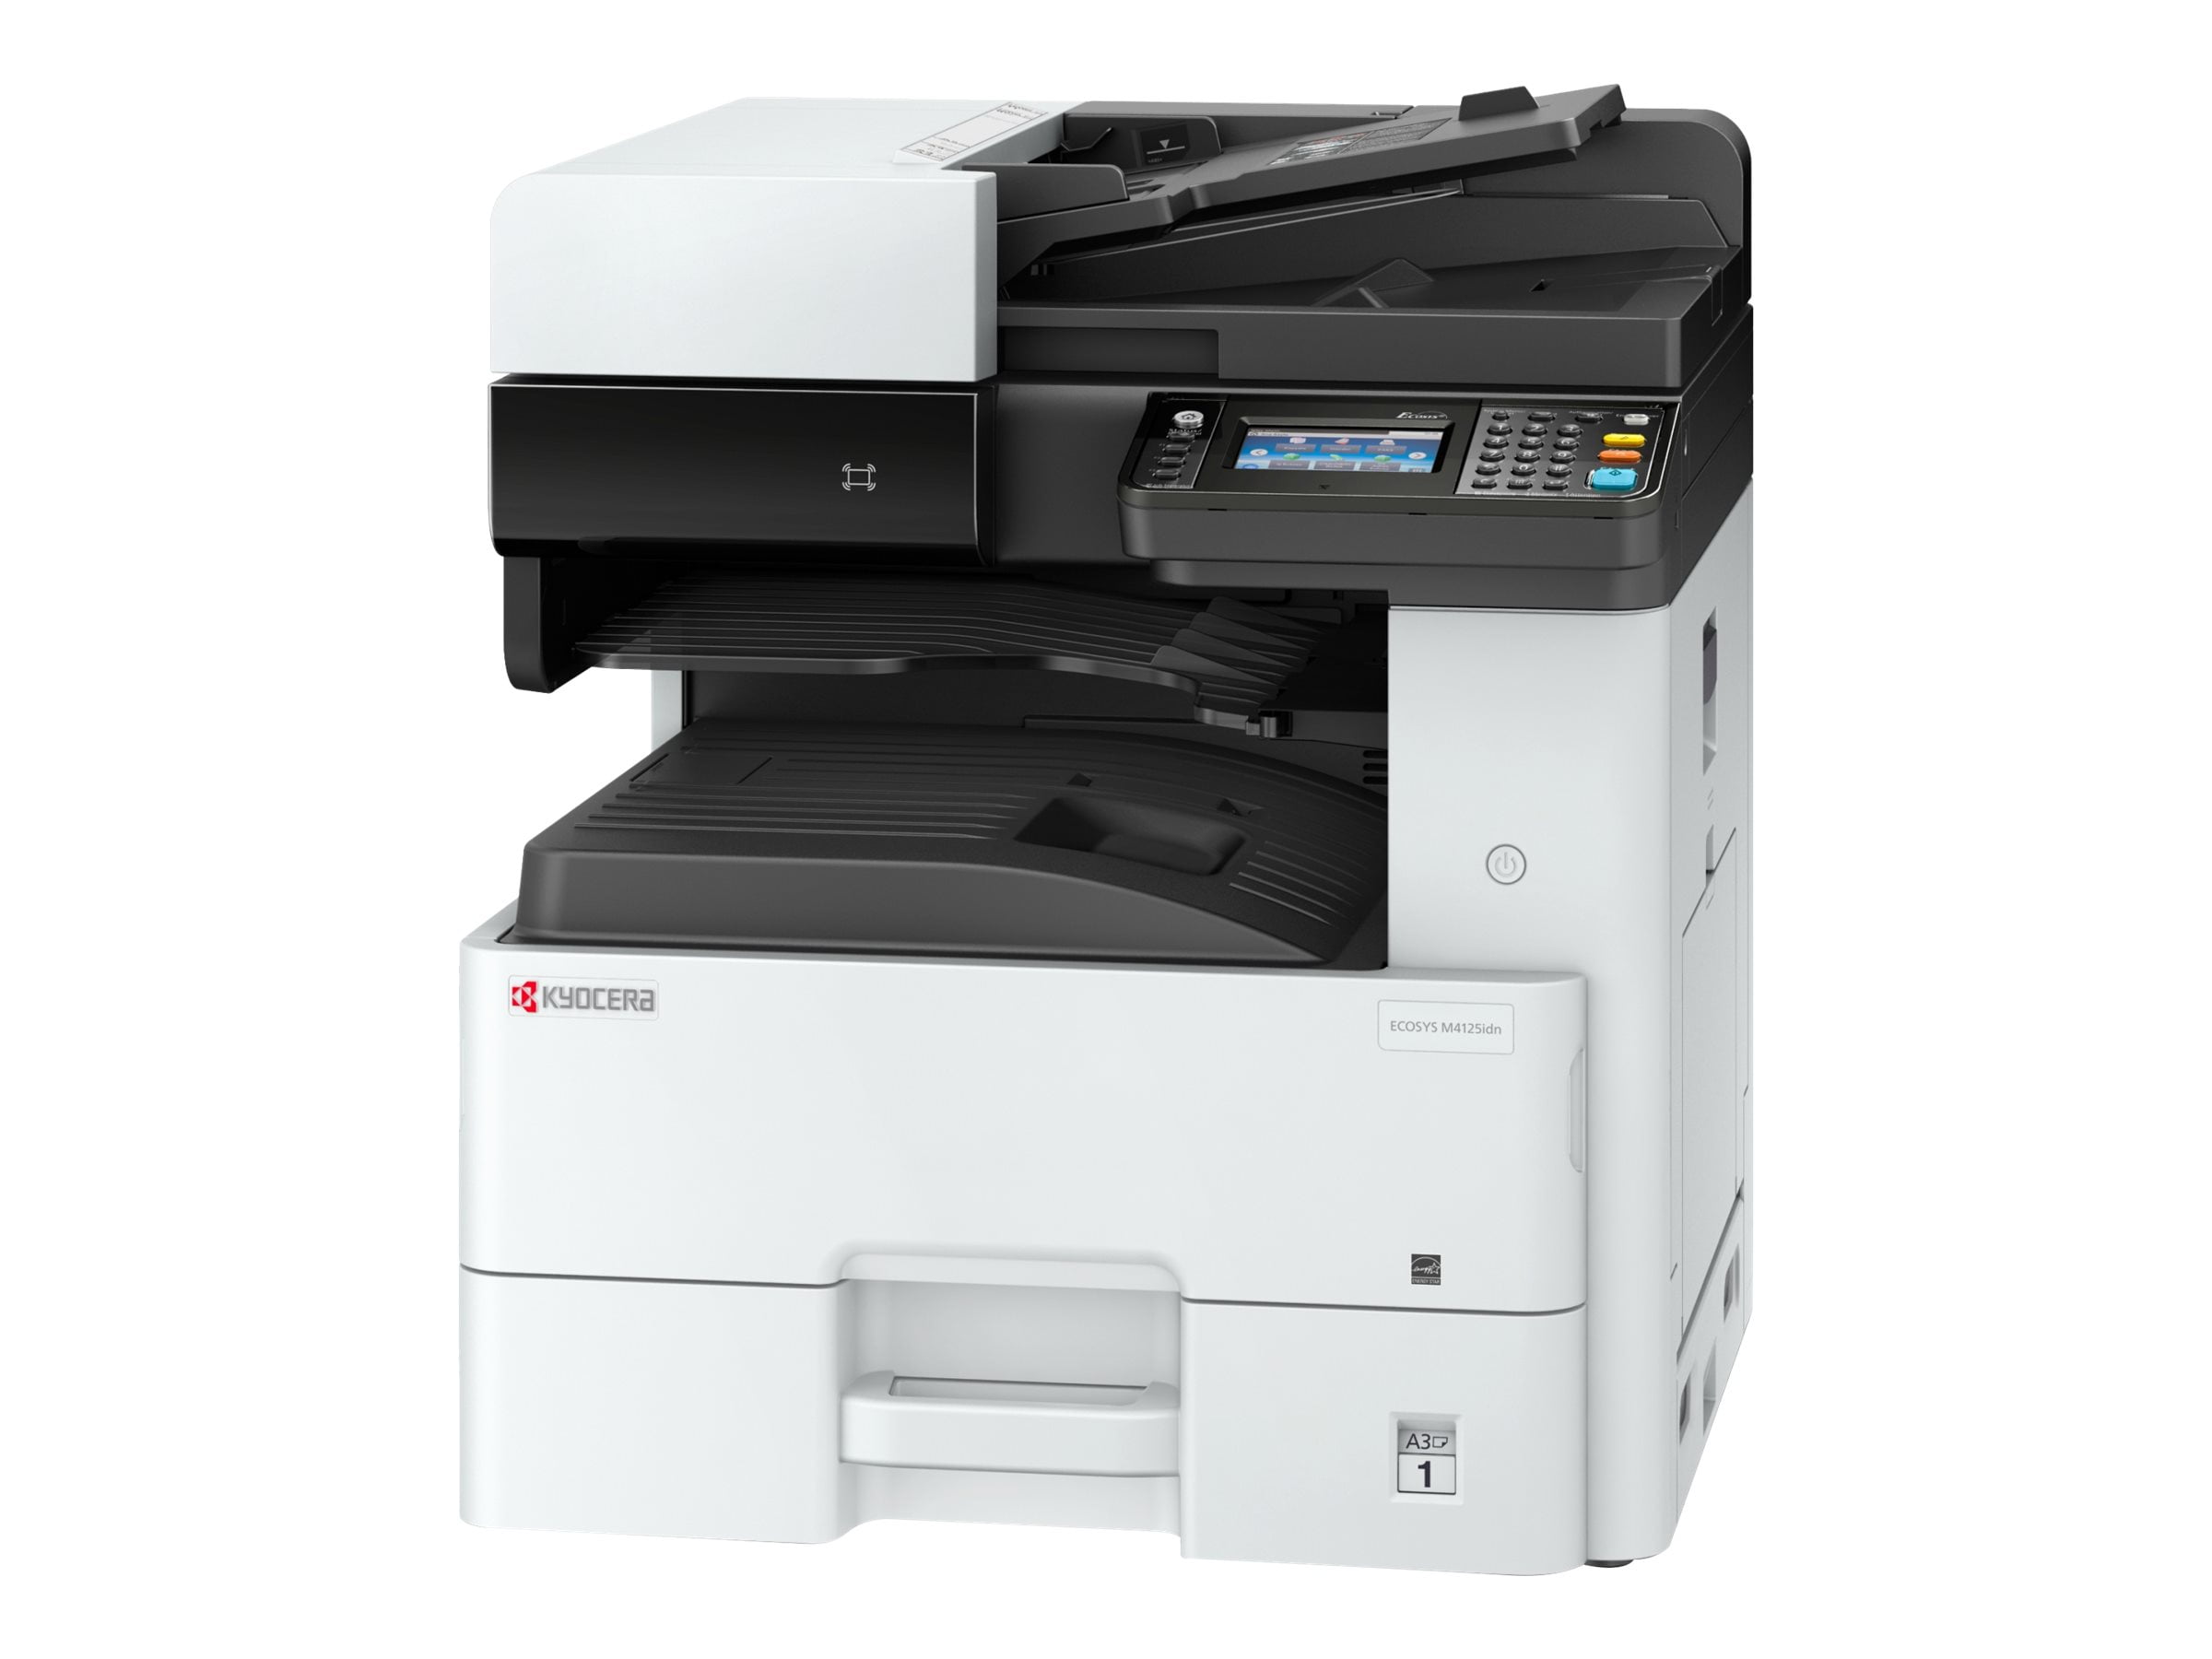 M4125idn Multifunction printer - B/W - laser - Ledger/A3 (11.7 in x 17 in) (original) - A3/Ledger (media) - up to 25 ppm (copying) - up to 25 (